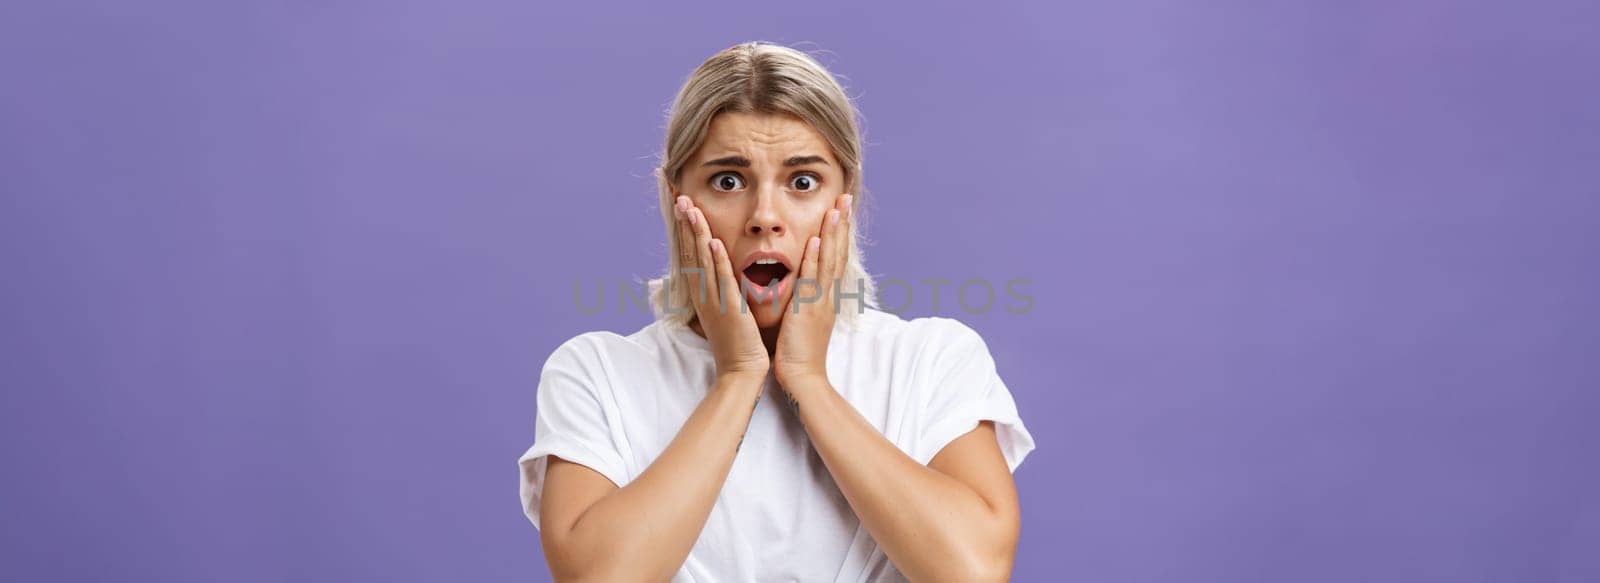 Shocked and worried silly european woman expressing empathy feeling sorry for poor animal in danger gasping opening mouth holding hands on face frowning feeling troubled over purple wall by Benzoix